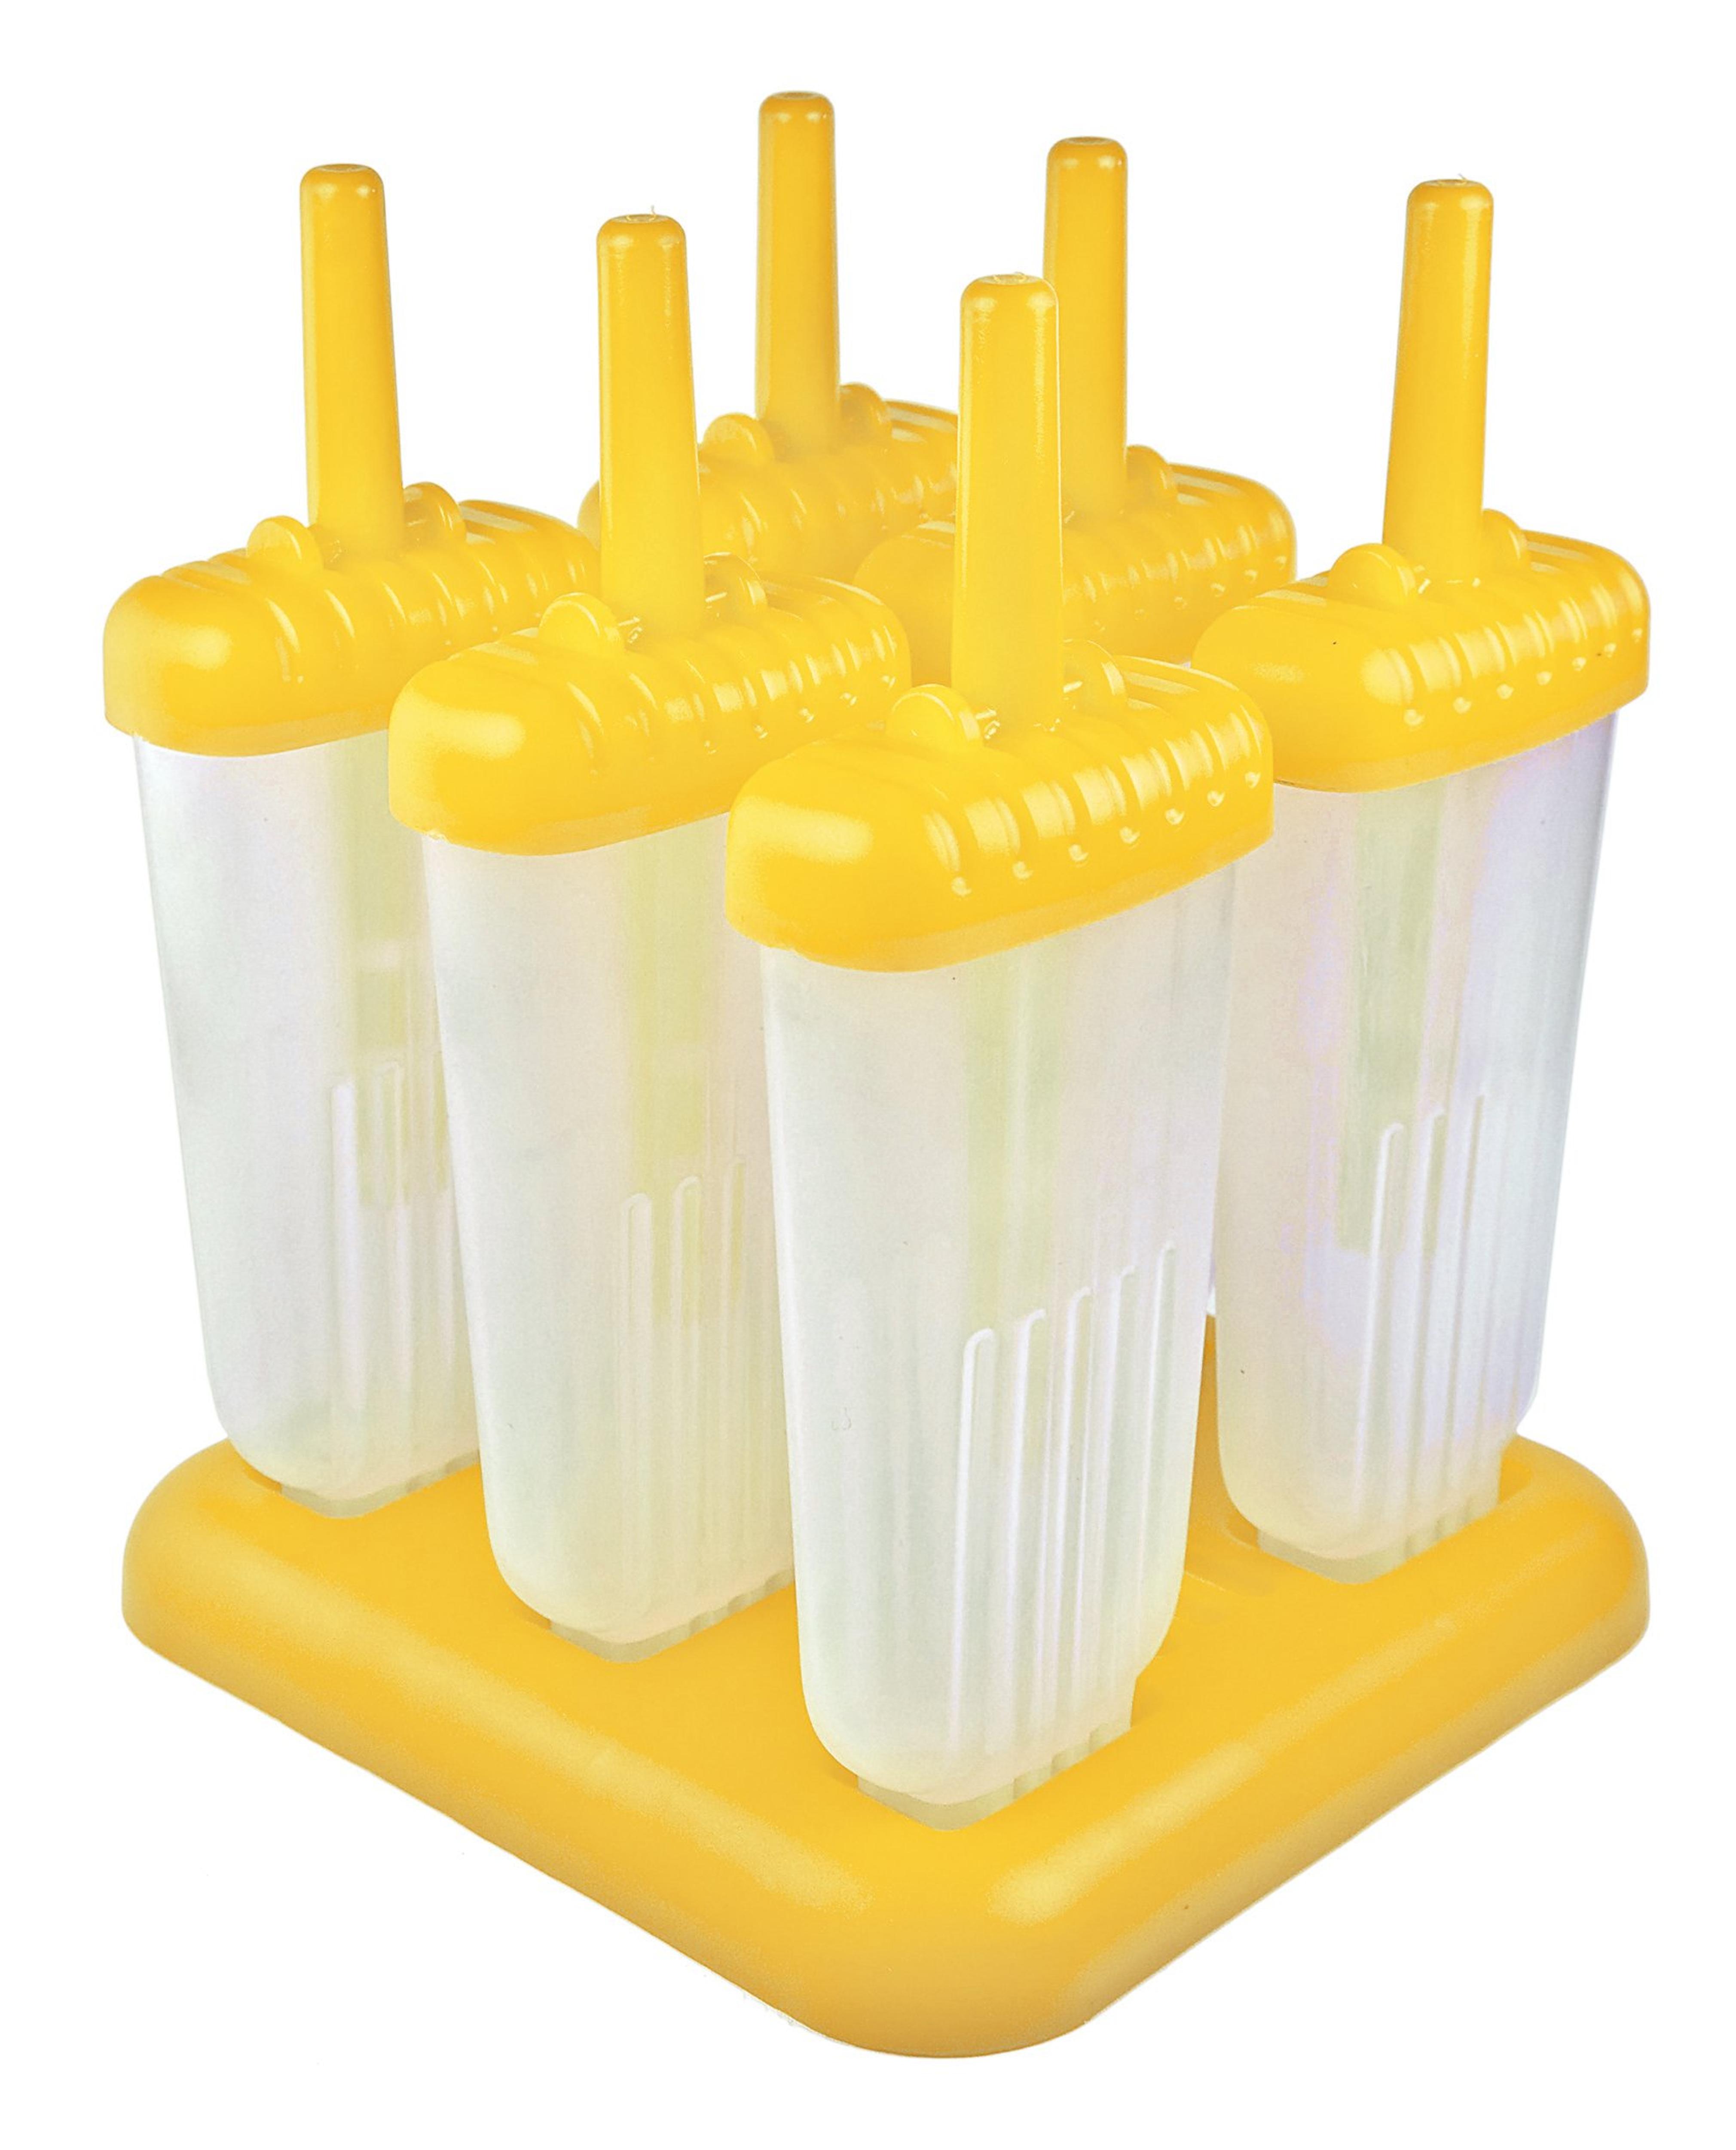 Tovolo Groovy Ice Pop Molds, Yellow - Set of 6